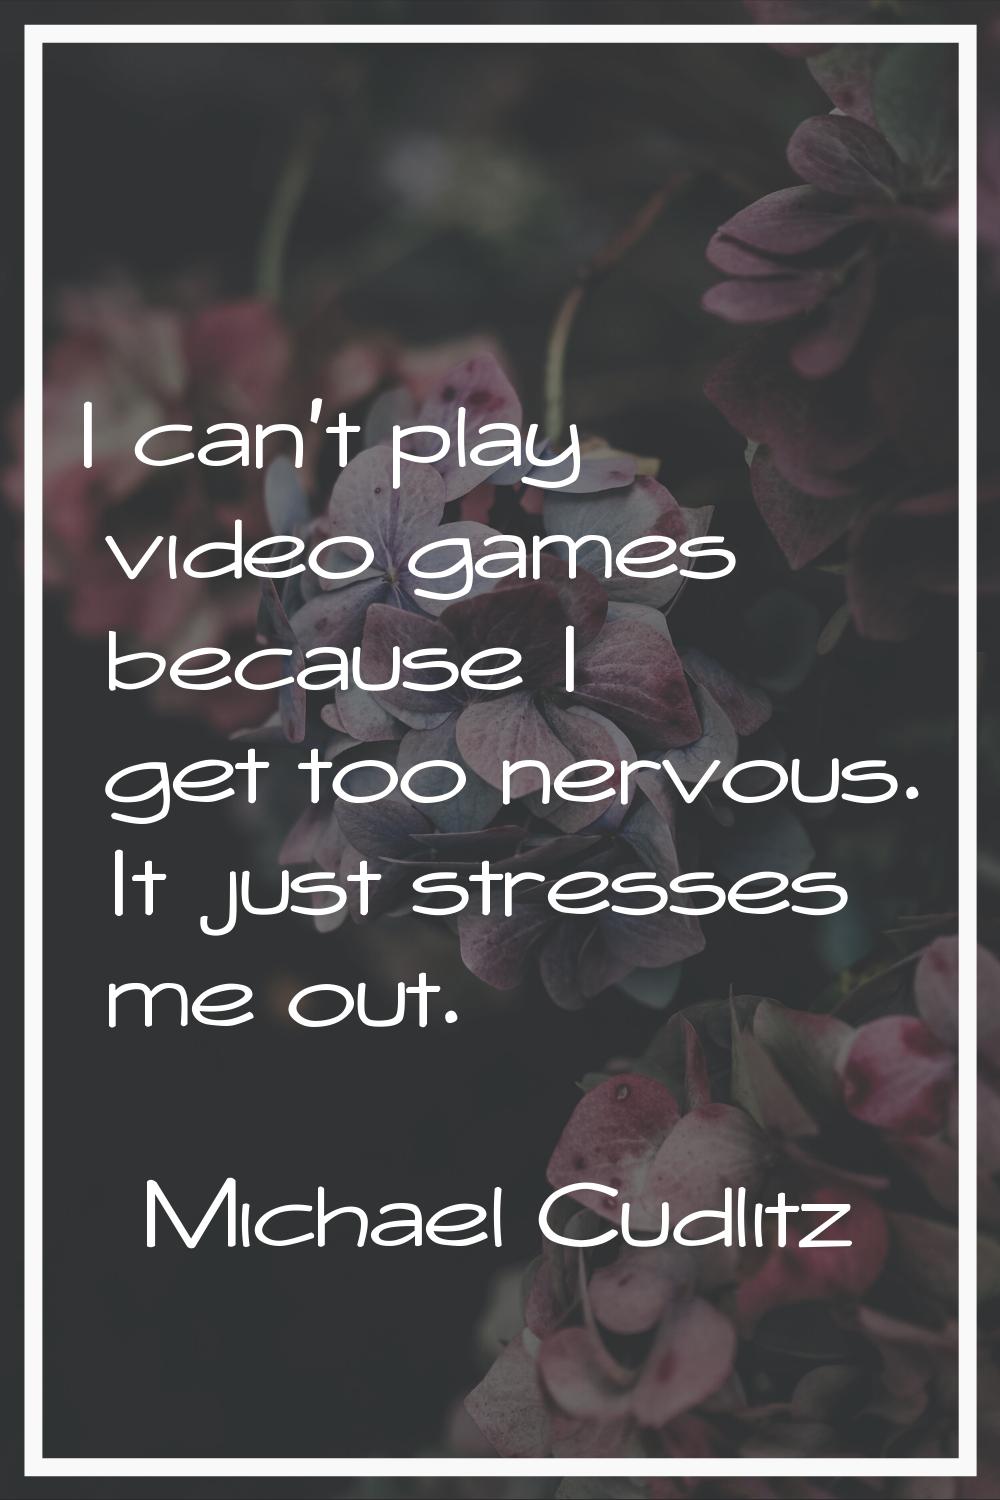 I can't play video games because I get too nervous. It just stresses me out.